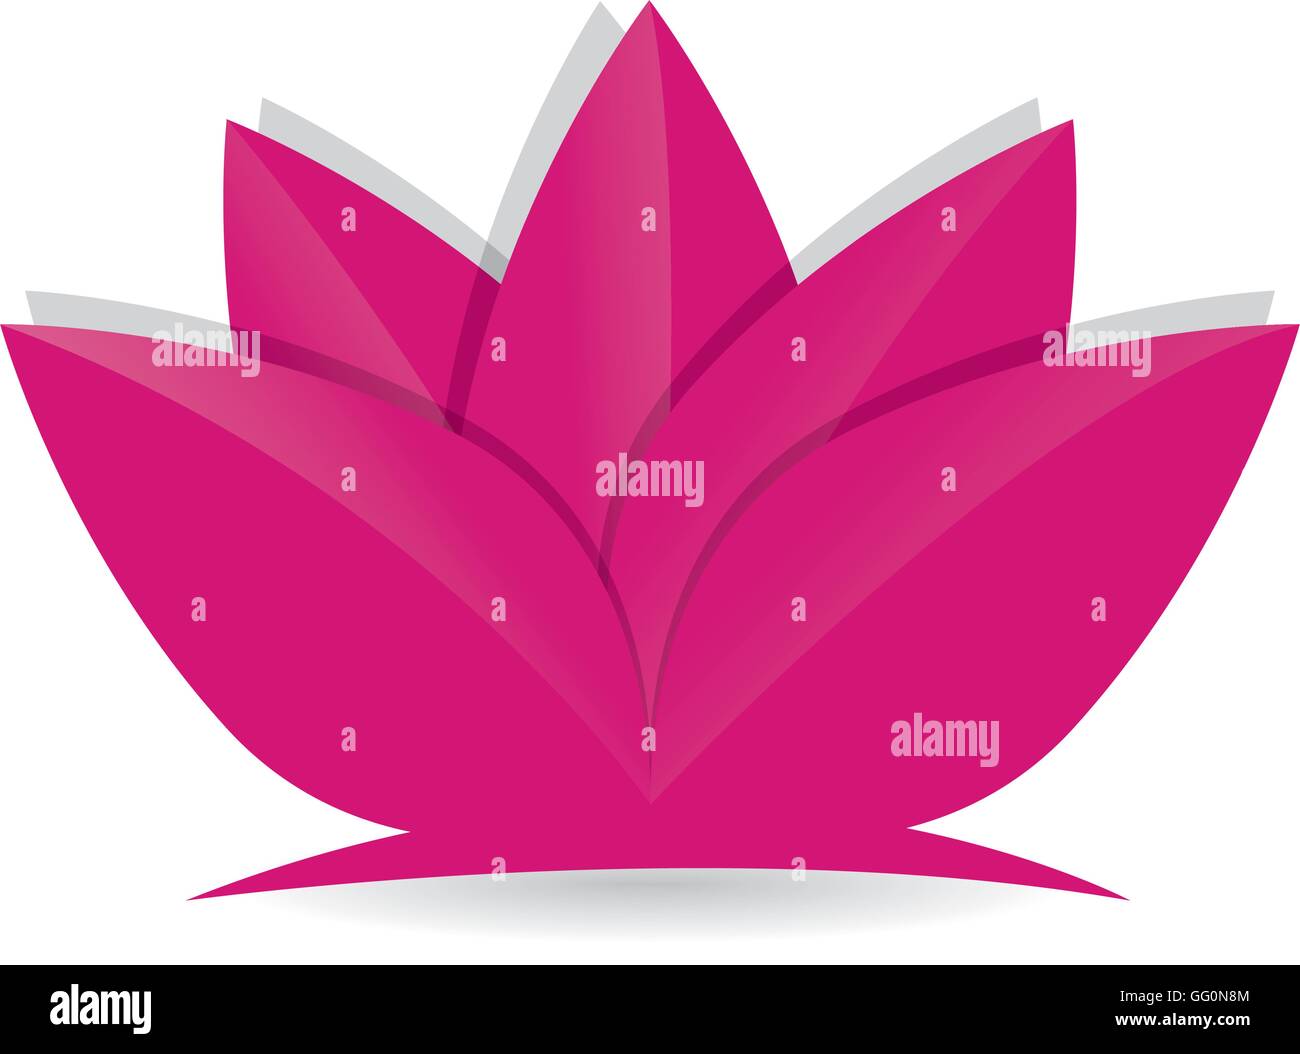 Isolated pink flower on a white background Stock Vector